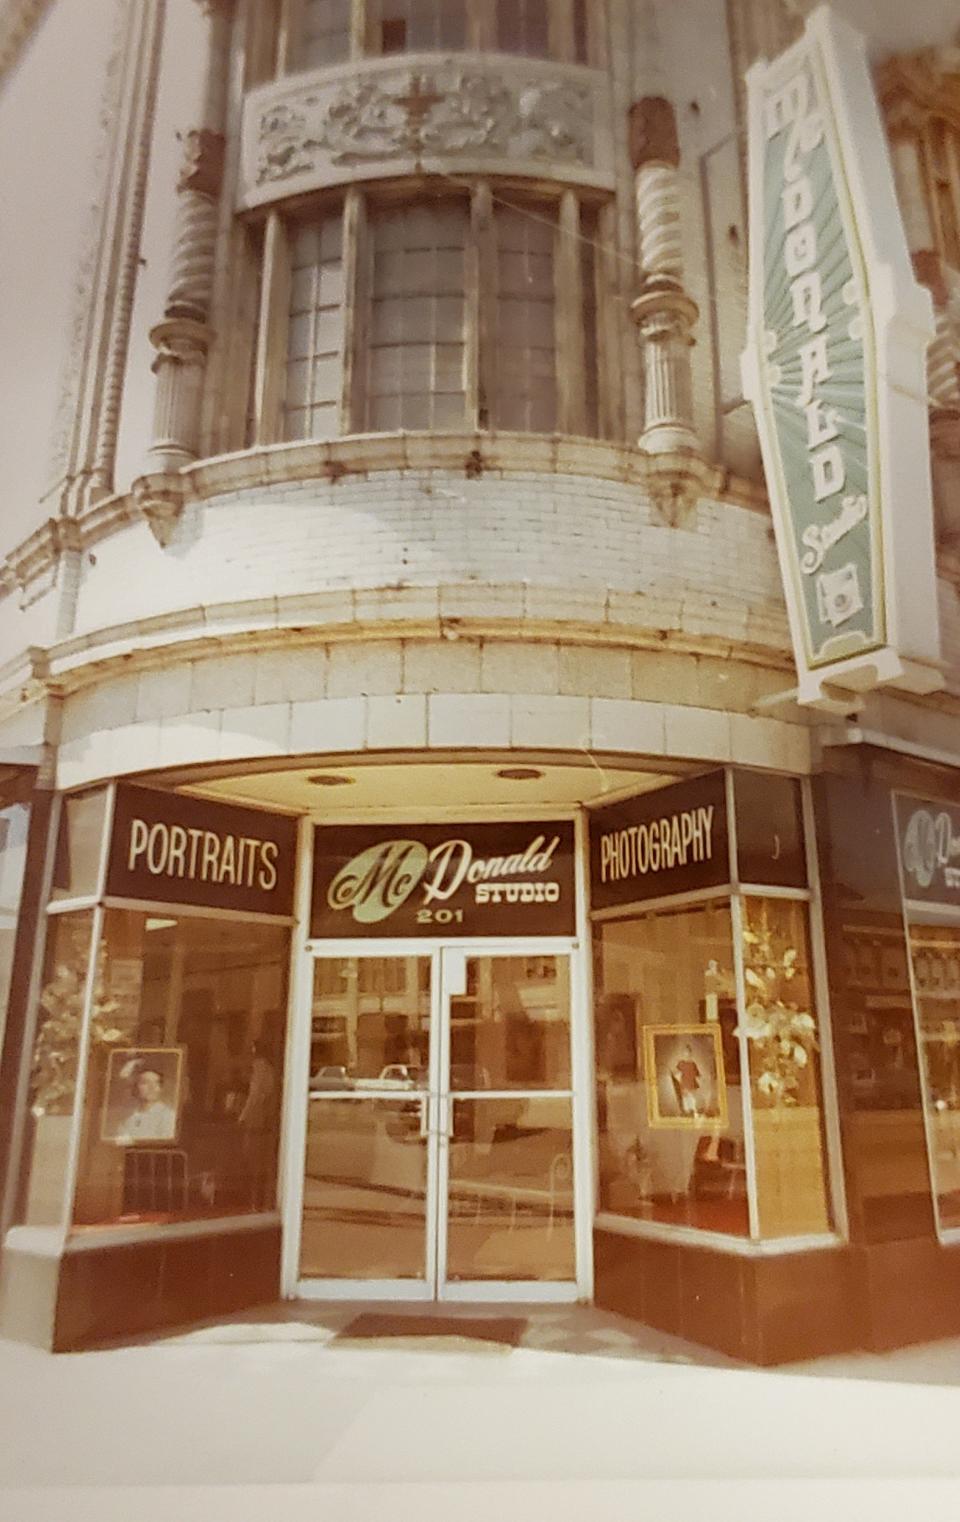 This undated photo shows the entrance to McDonald Studio on Michigan Street and Colfax Avenue in South Bend.